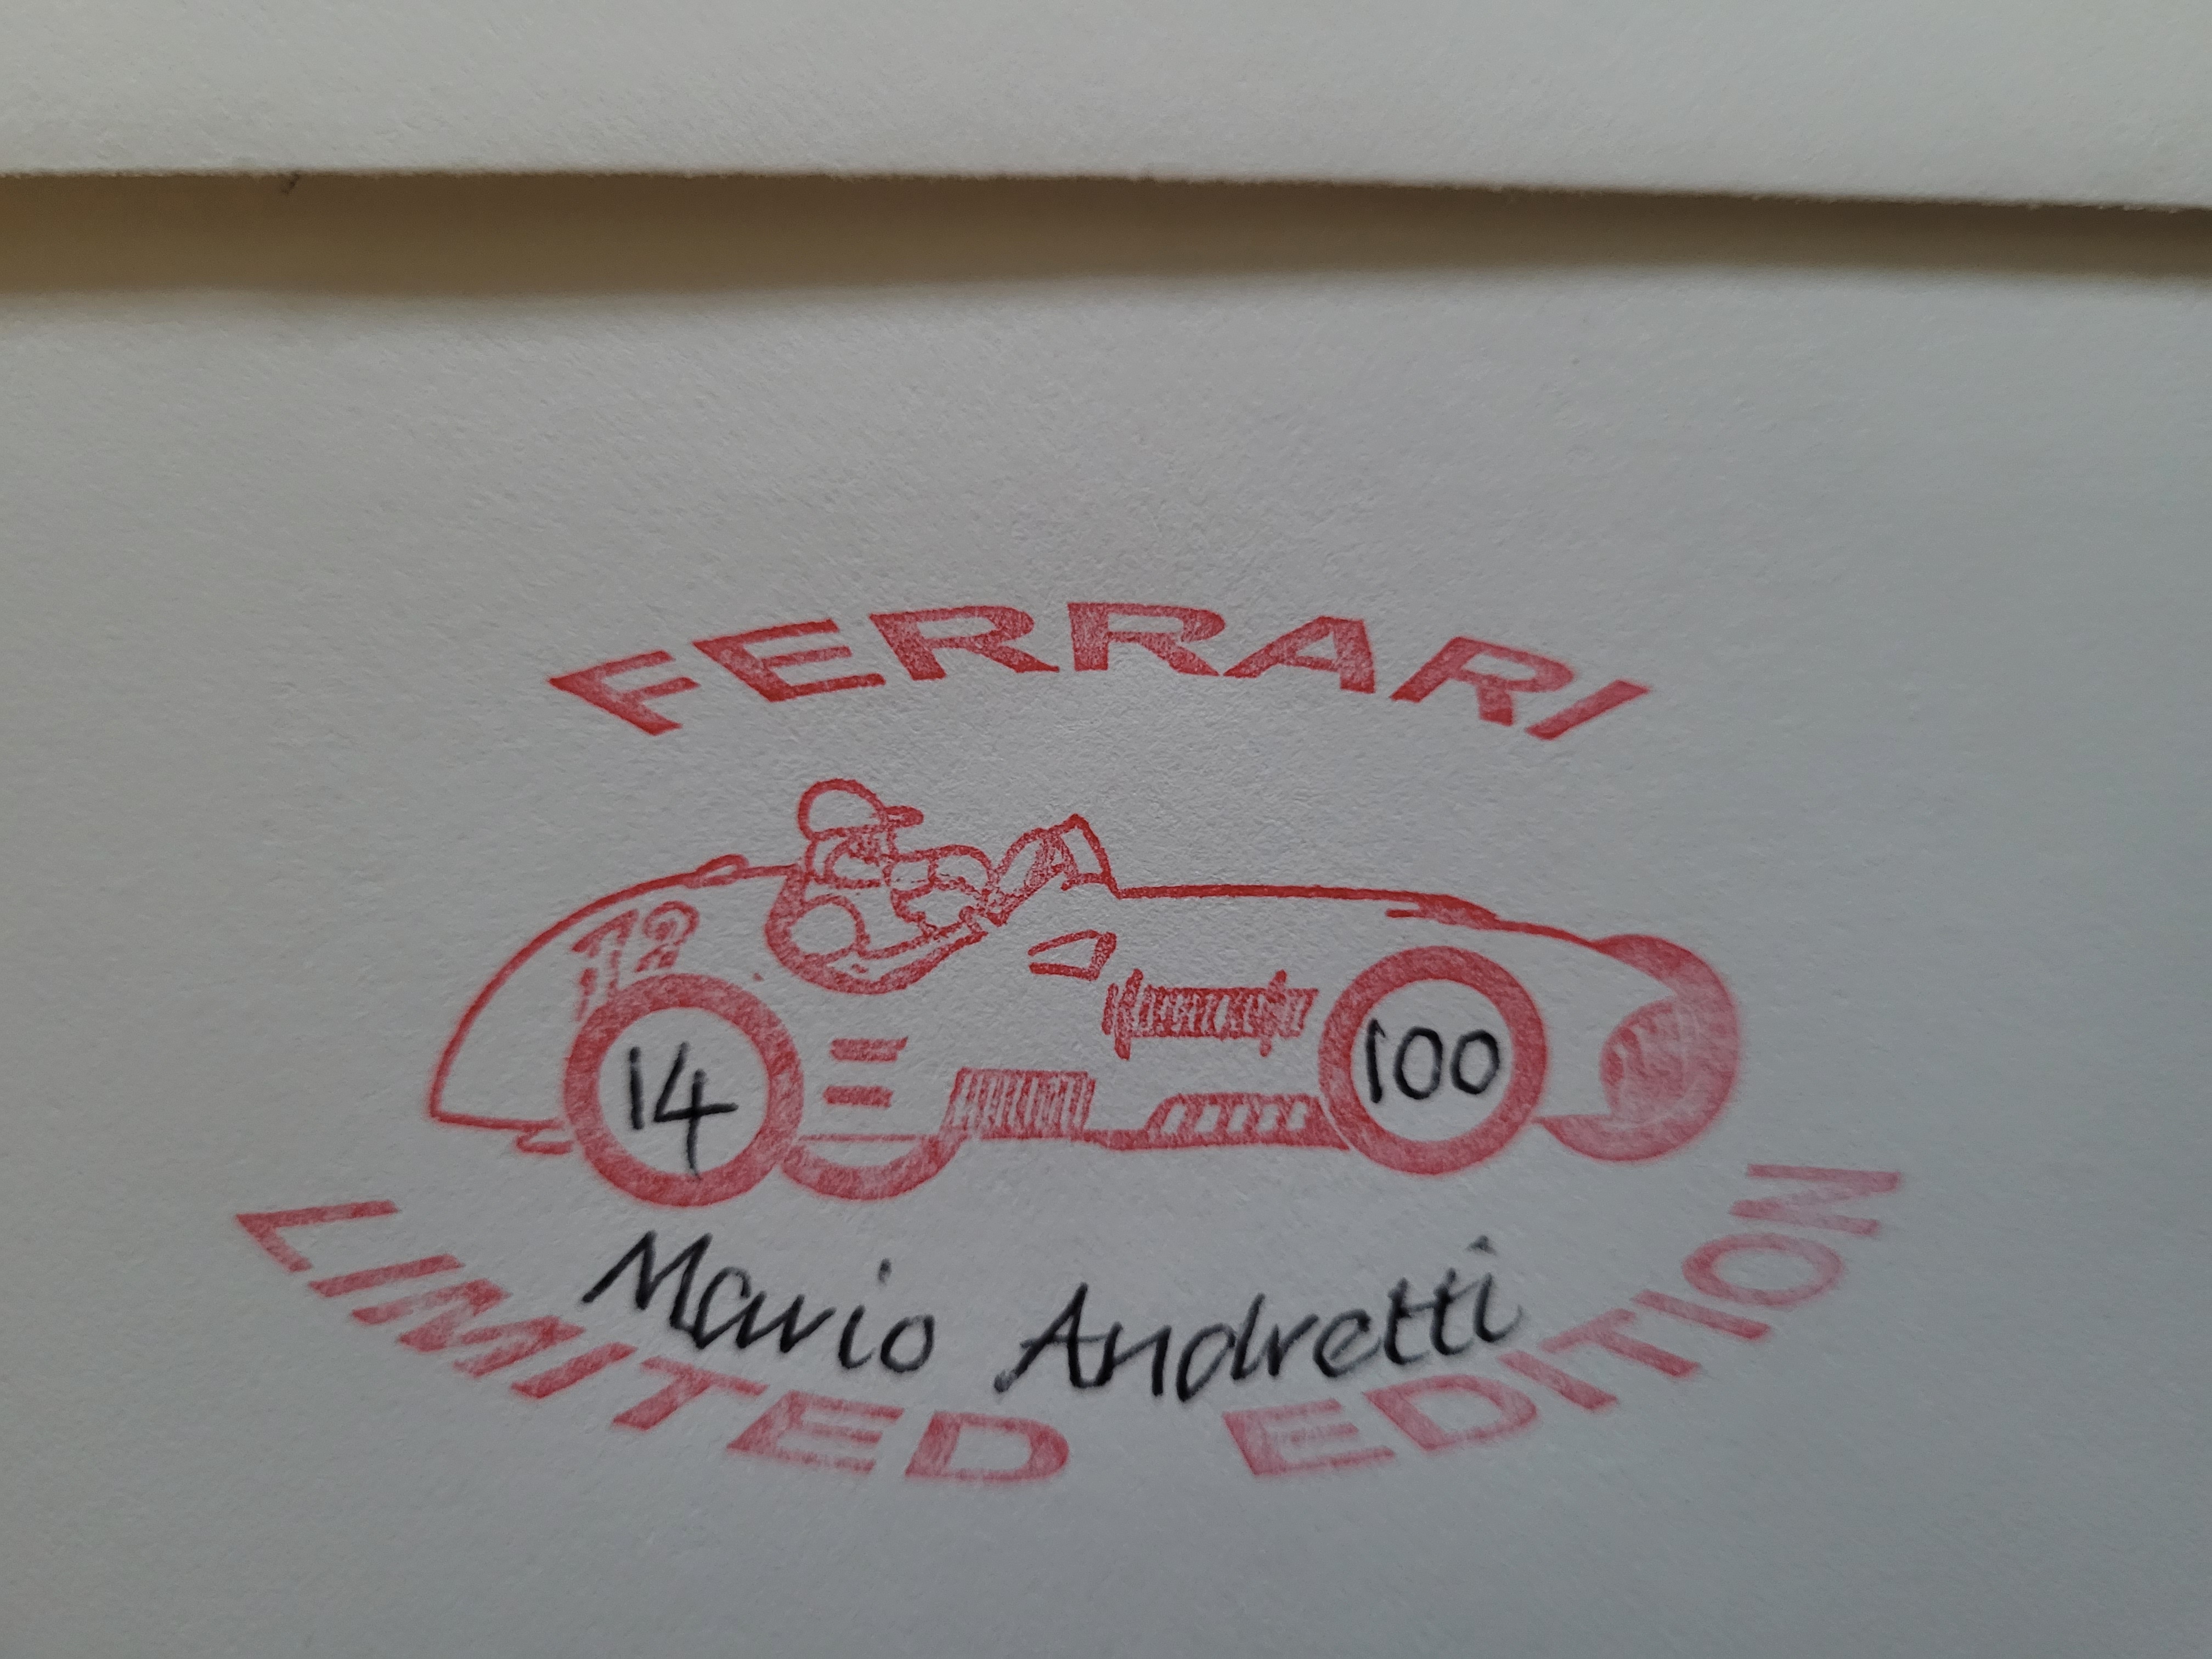 2001 FERRARI MOTOR RACING LTD EDITION POSTAL COVER AUTOGRAPHED BY MARIO ANDRETTI - Image 2 of 2